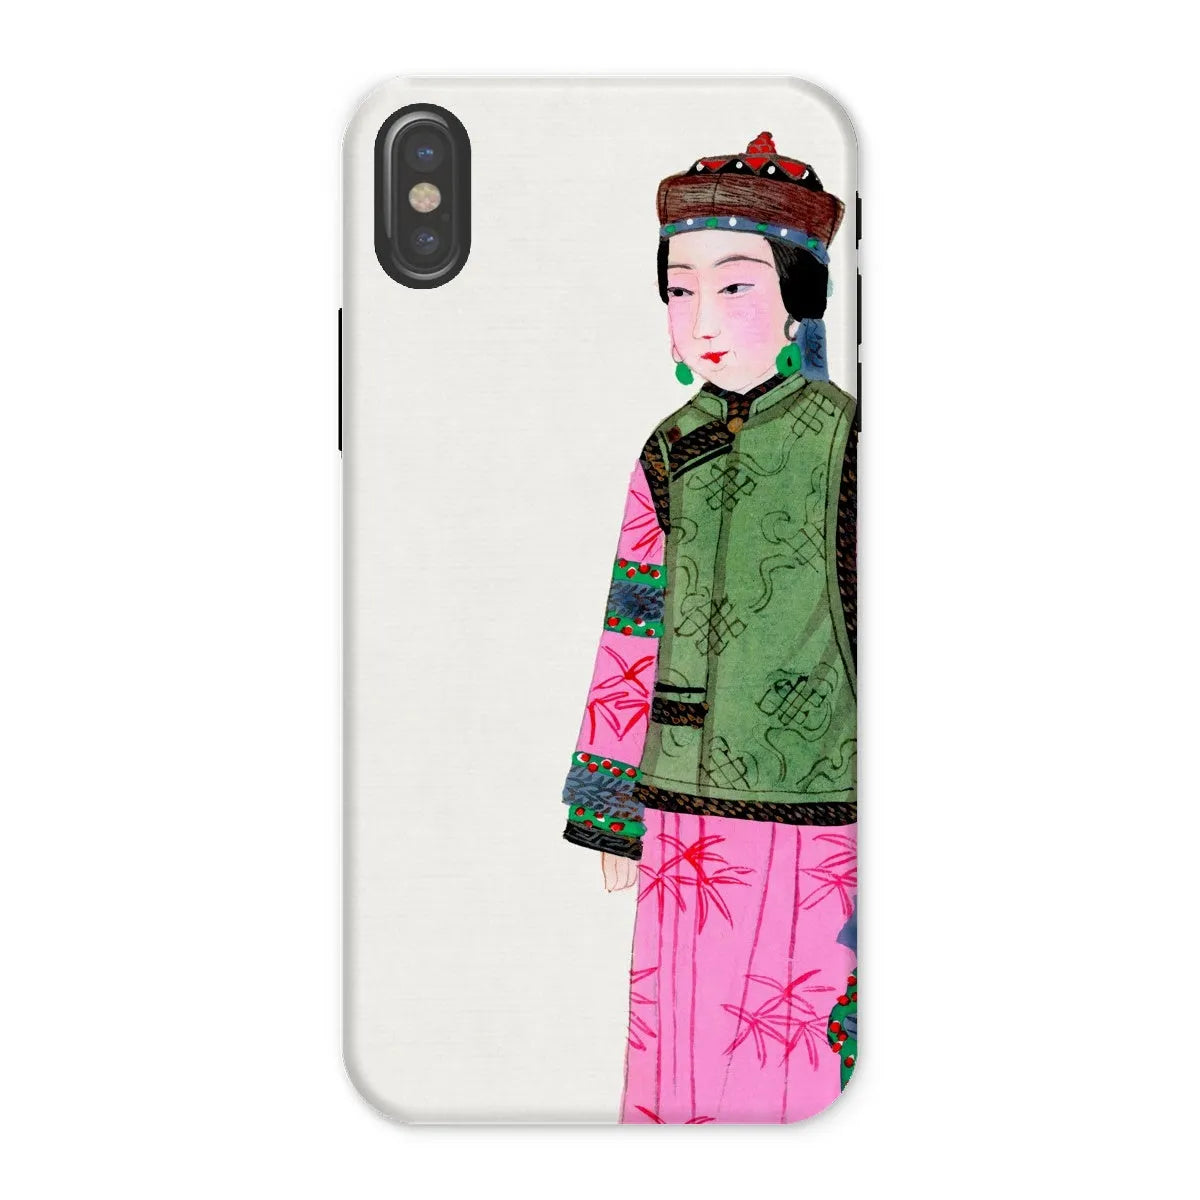 Noblewoman In Winter - Chinese Aesthetic Art Phone Case - Iphone x / Matte - Mobile Phone Cases - Aesthetic Art